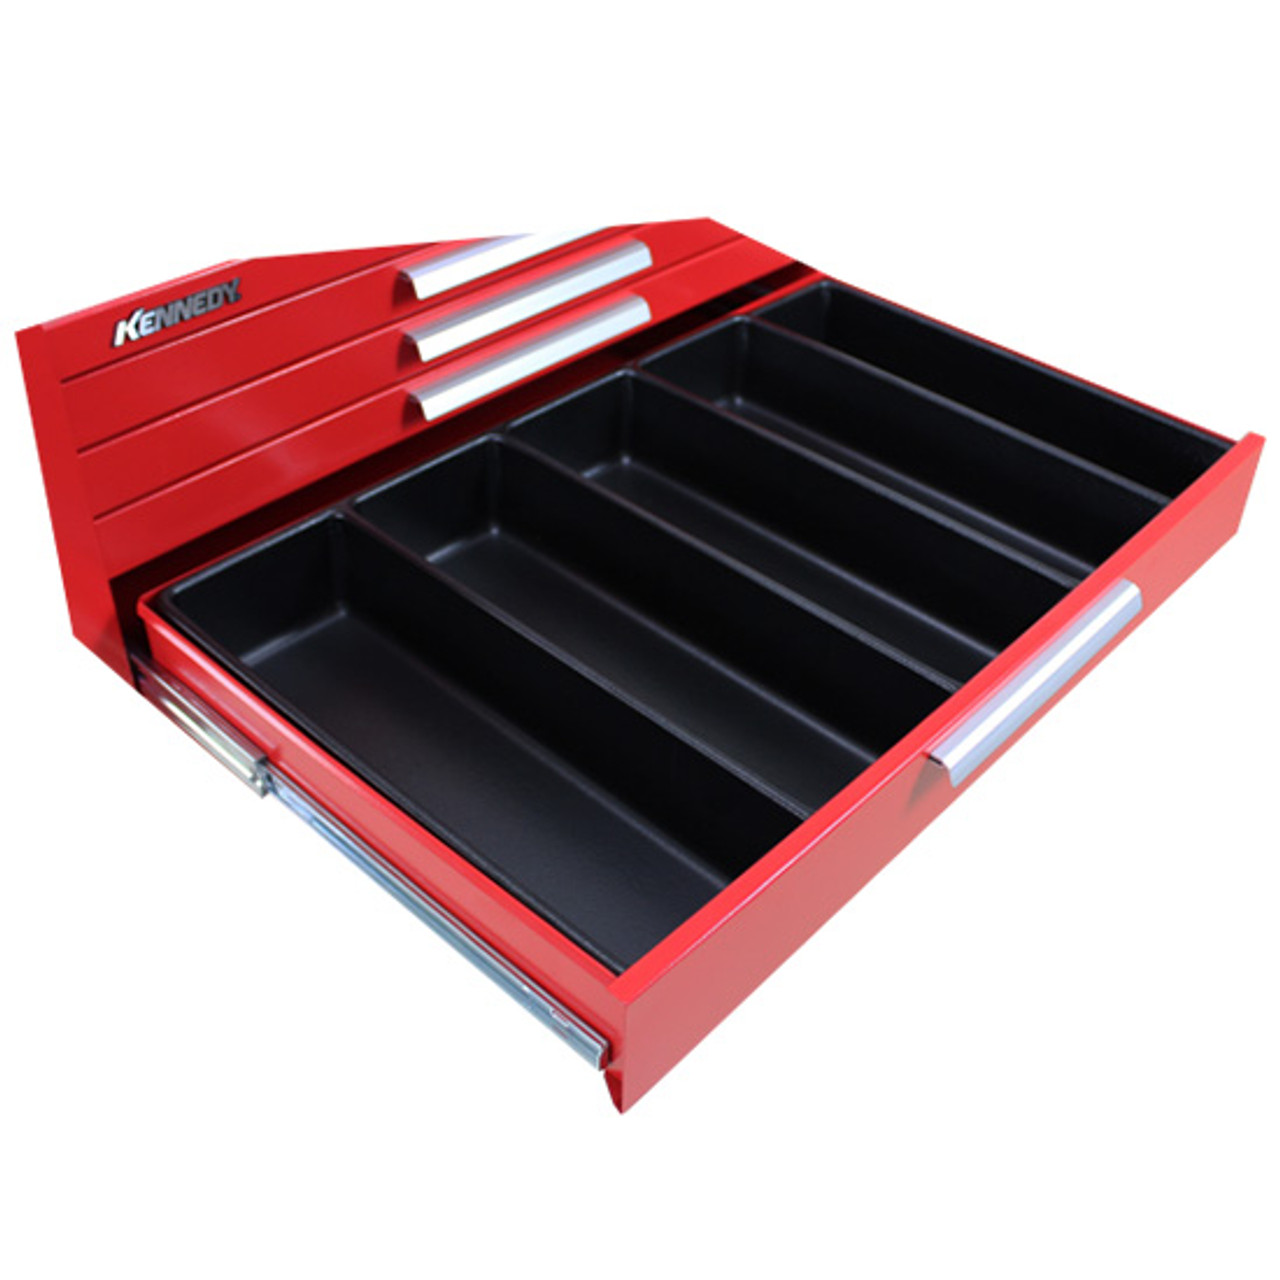 Kennedy 81936 Tool Case Organizer: Durable ABS Plastic